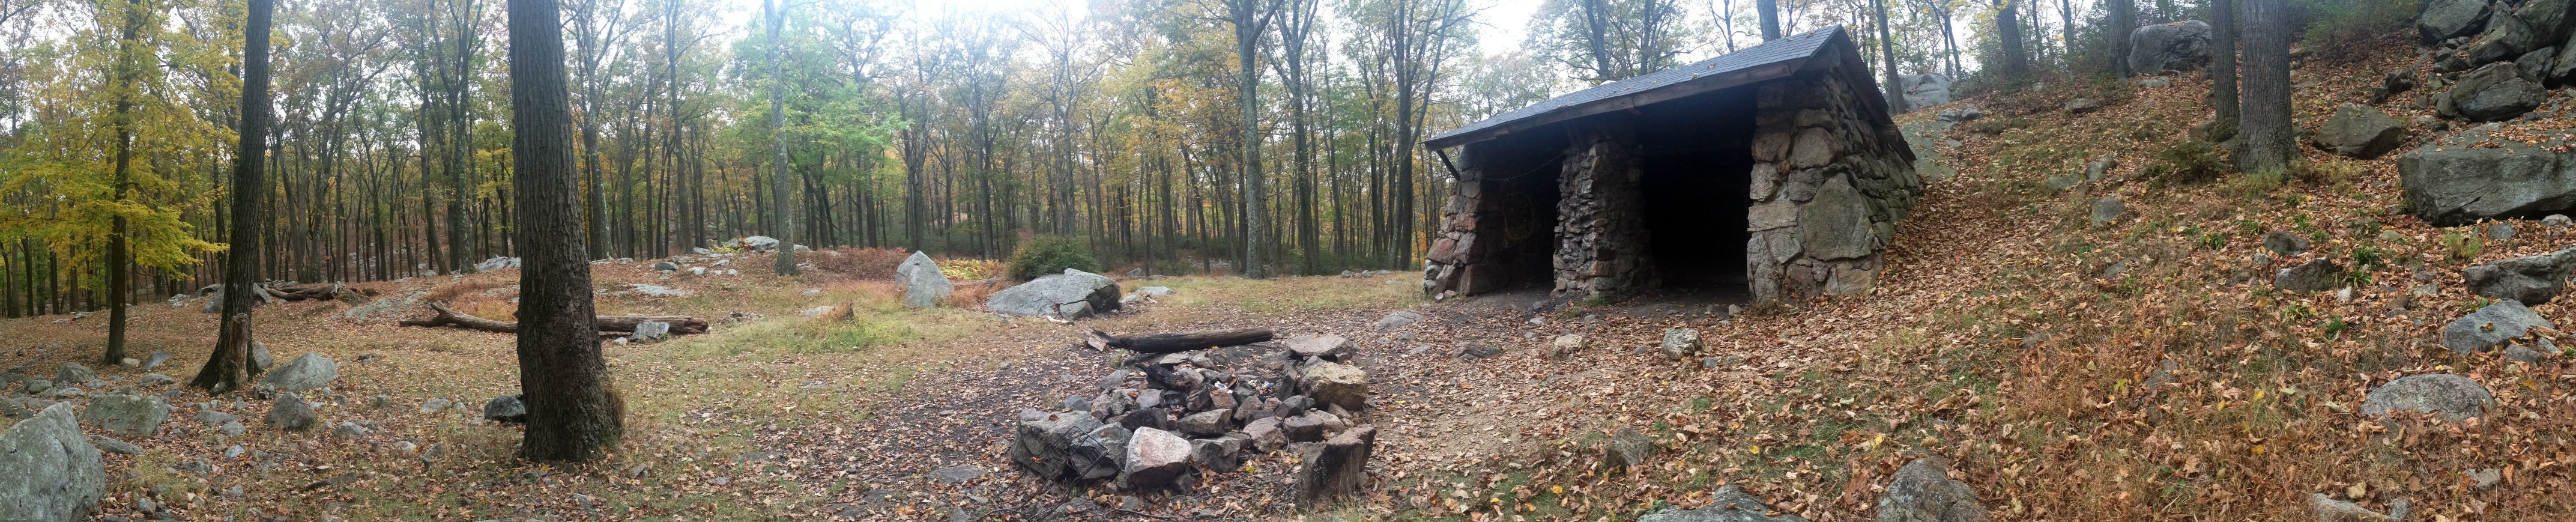 Harriman State Park Lean-Tos | Stone Shelter Camping